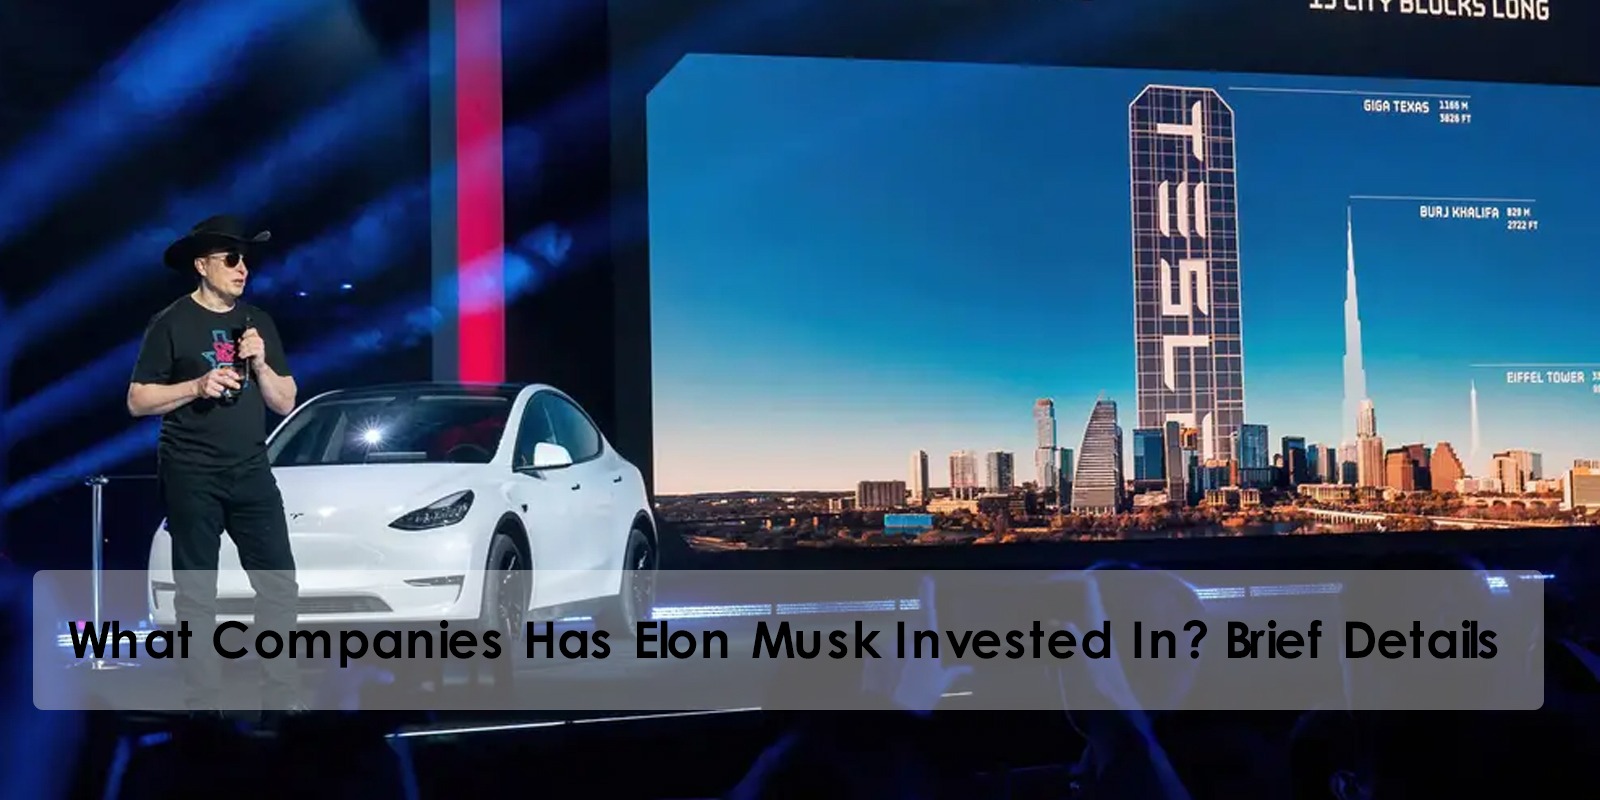 What Companies Has Elon Musk Invested In? Brief Details